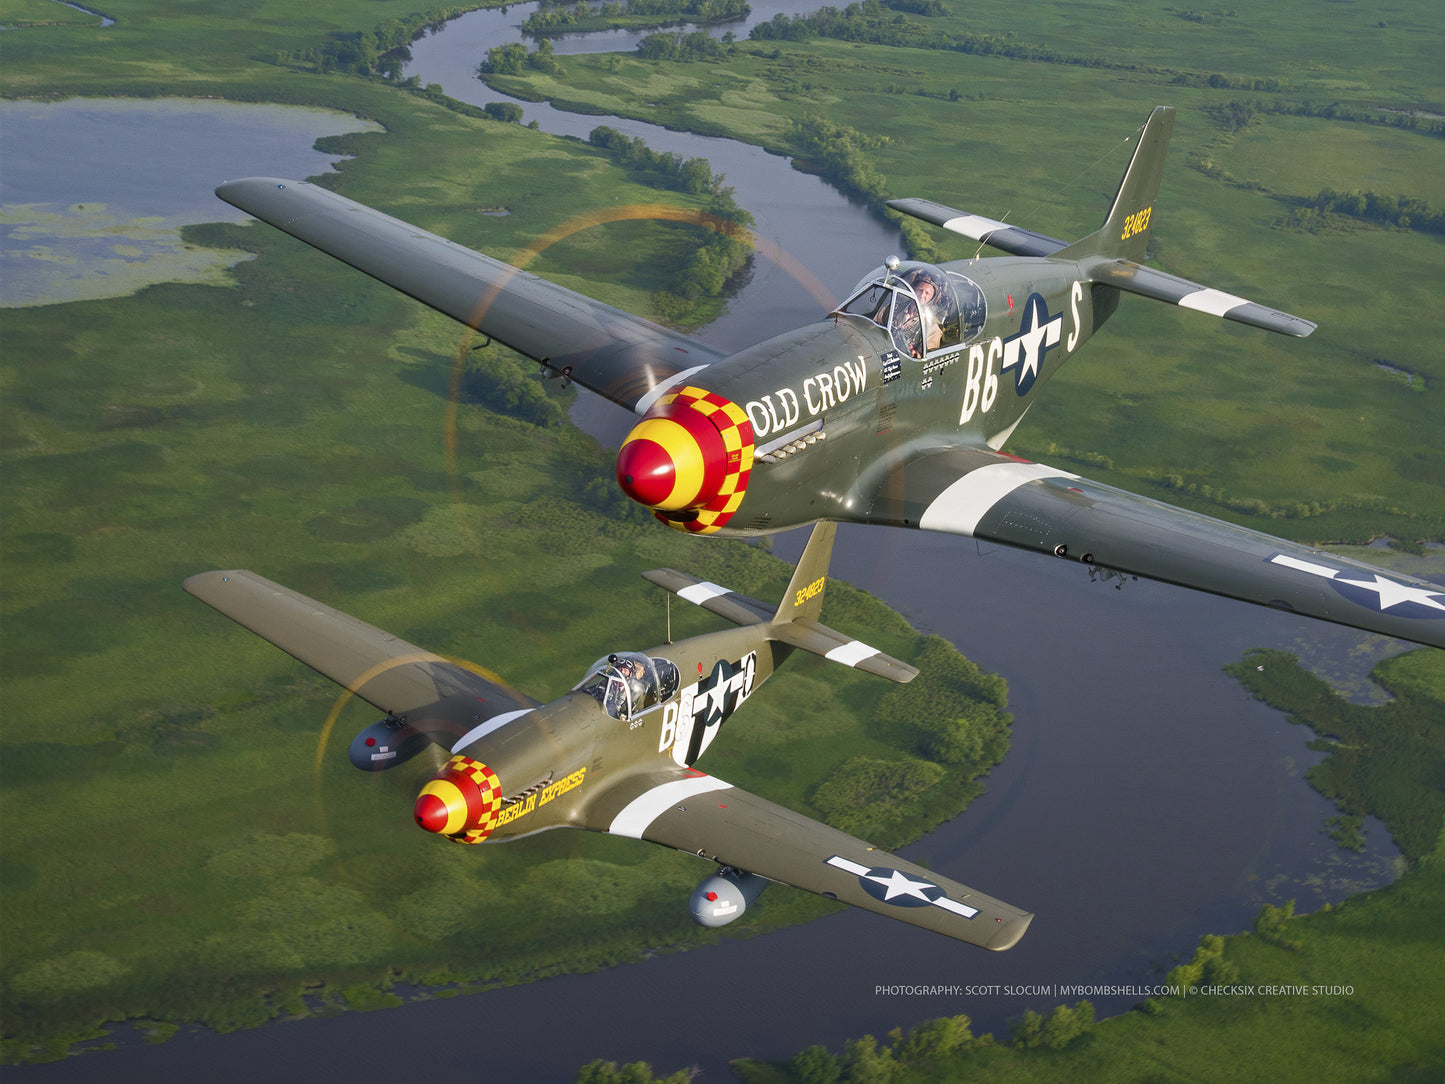 P-51 Mustang 2-Ship Formation over River